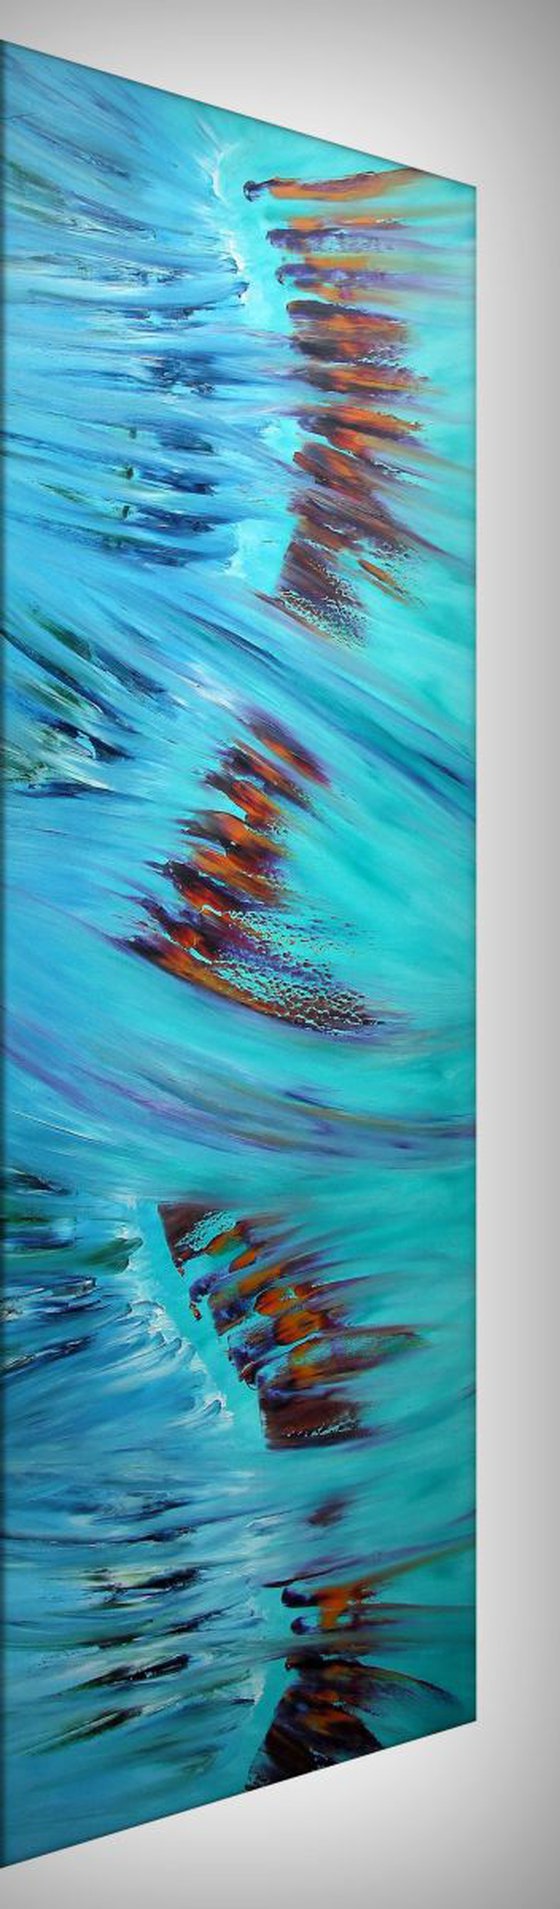 Spring - 40x120 cm, LARGE XL, Original abstract painting, oil on canvas